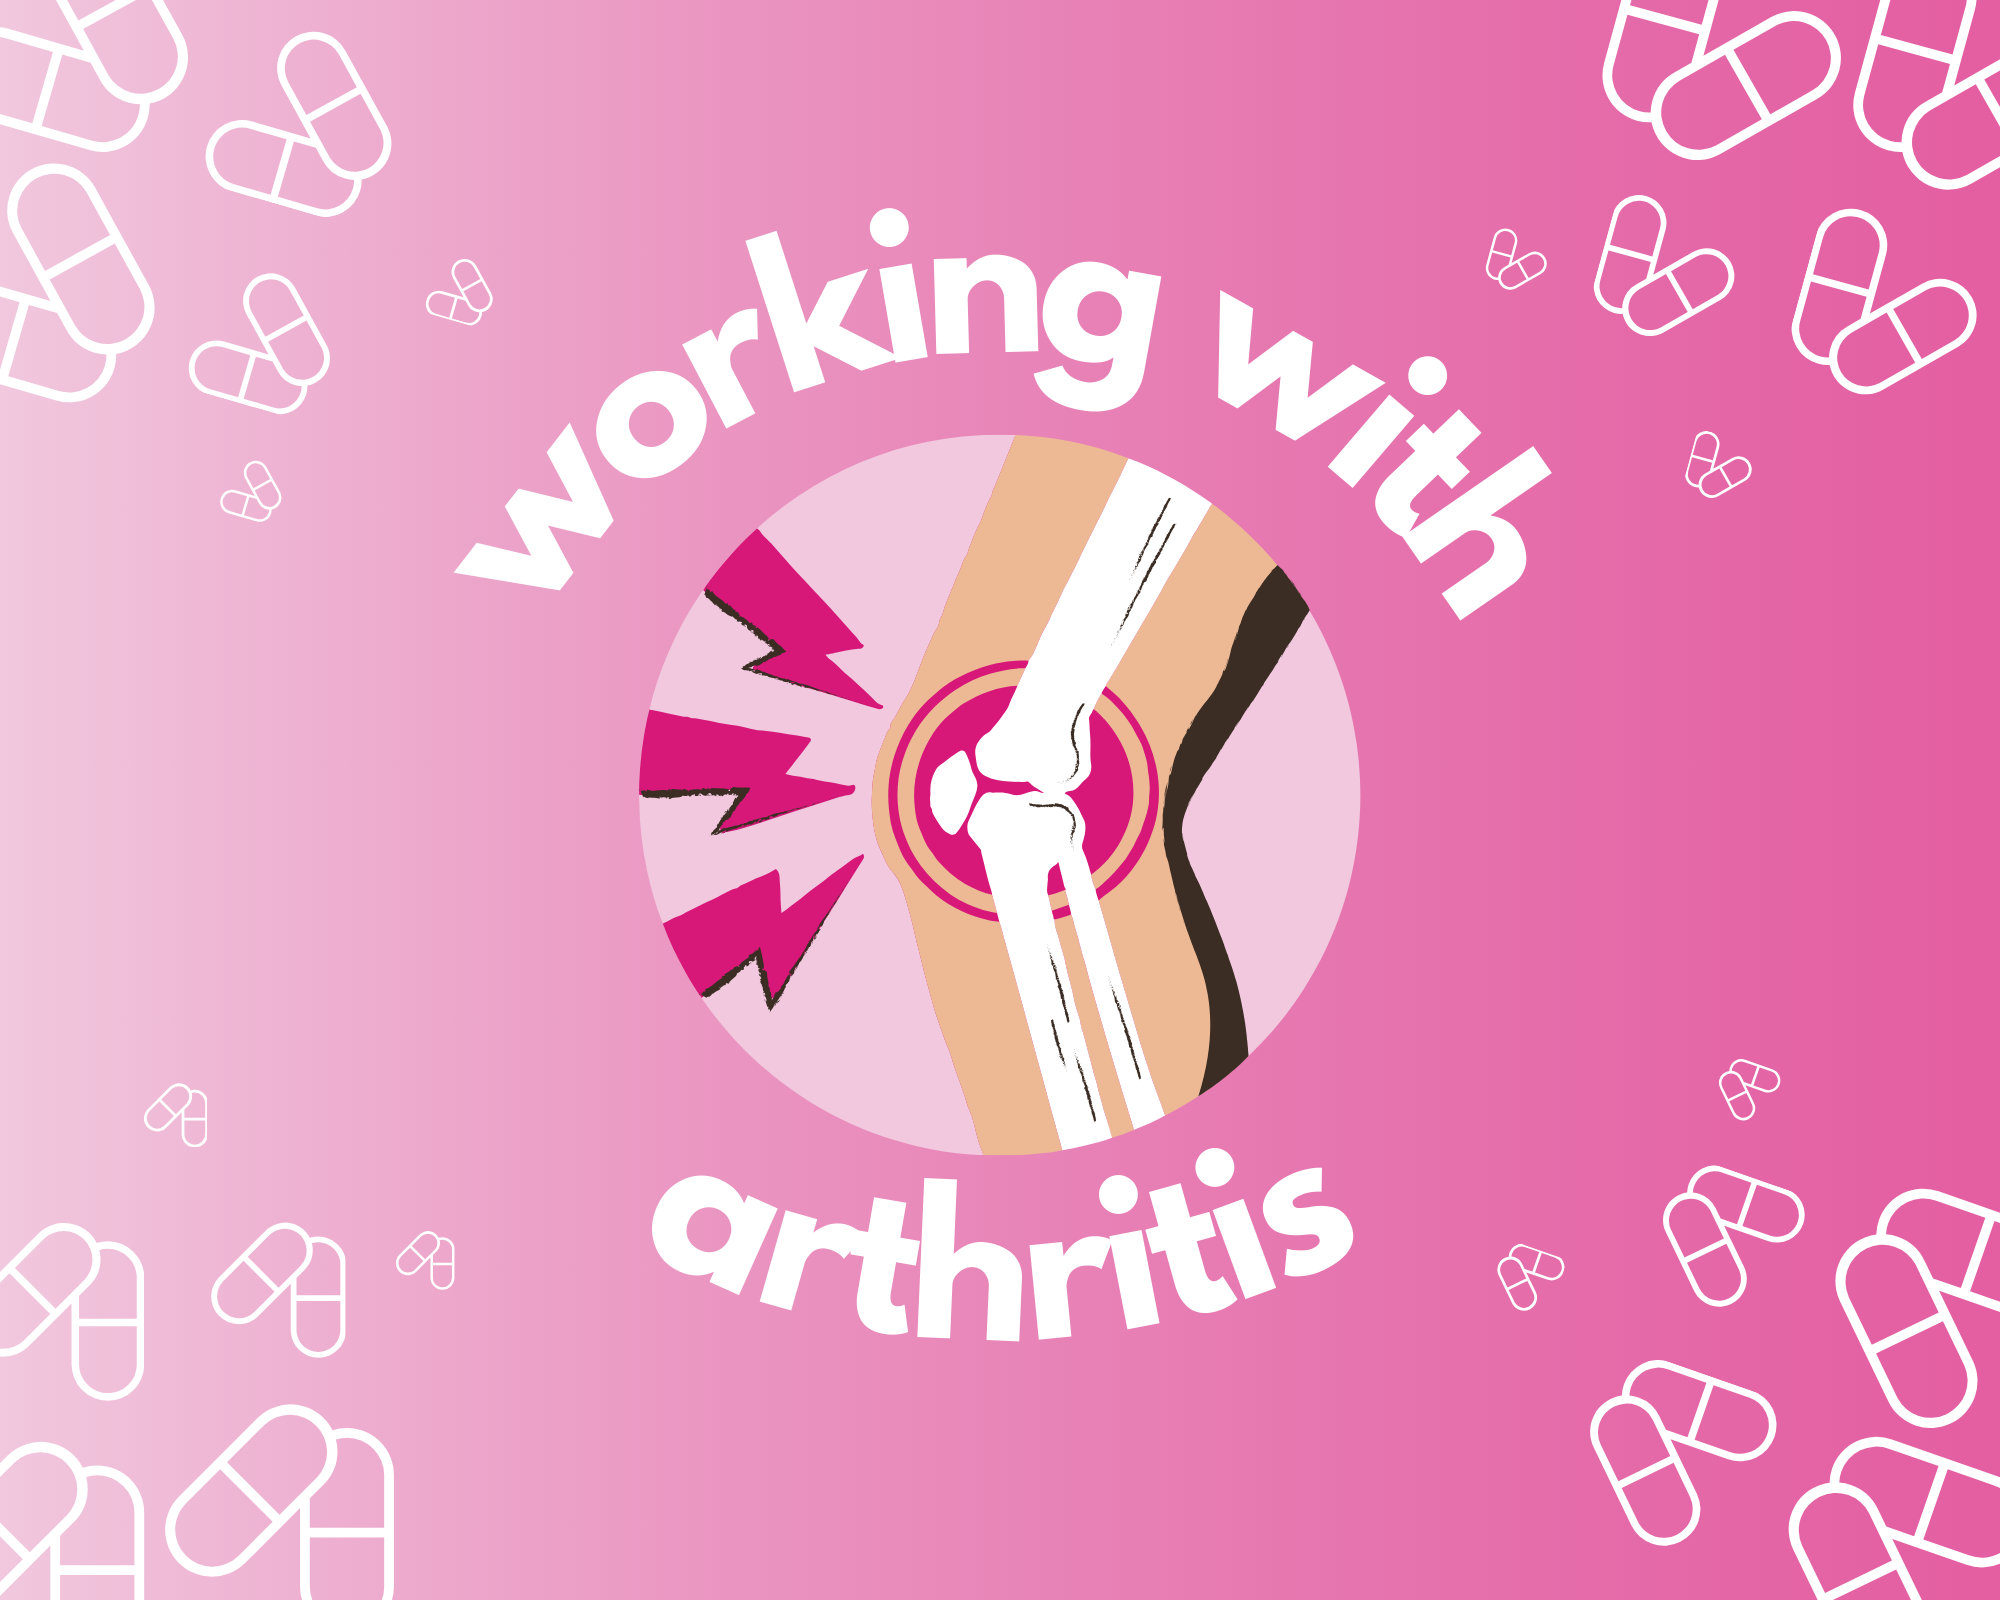 Image: working with arthritis, in pain